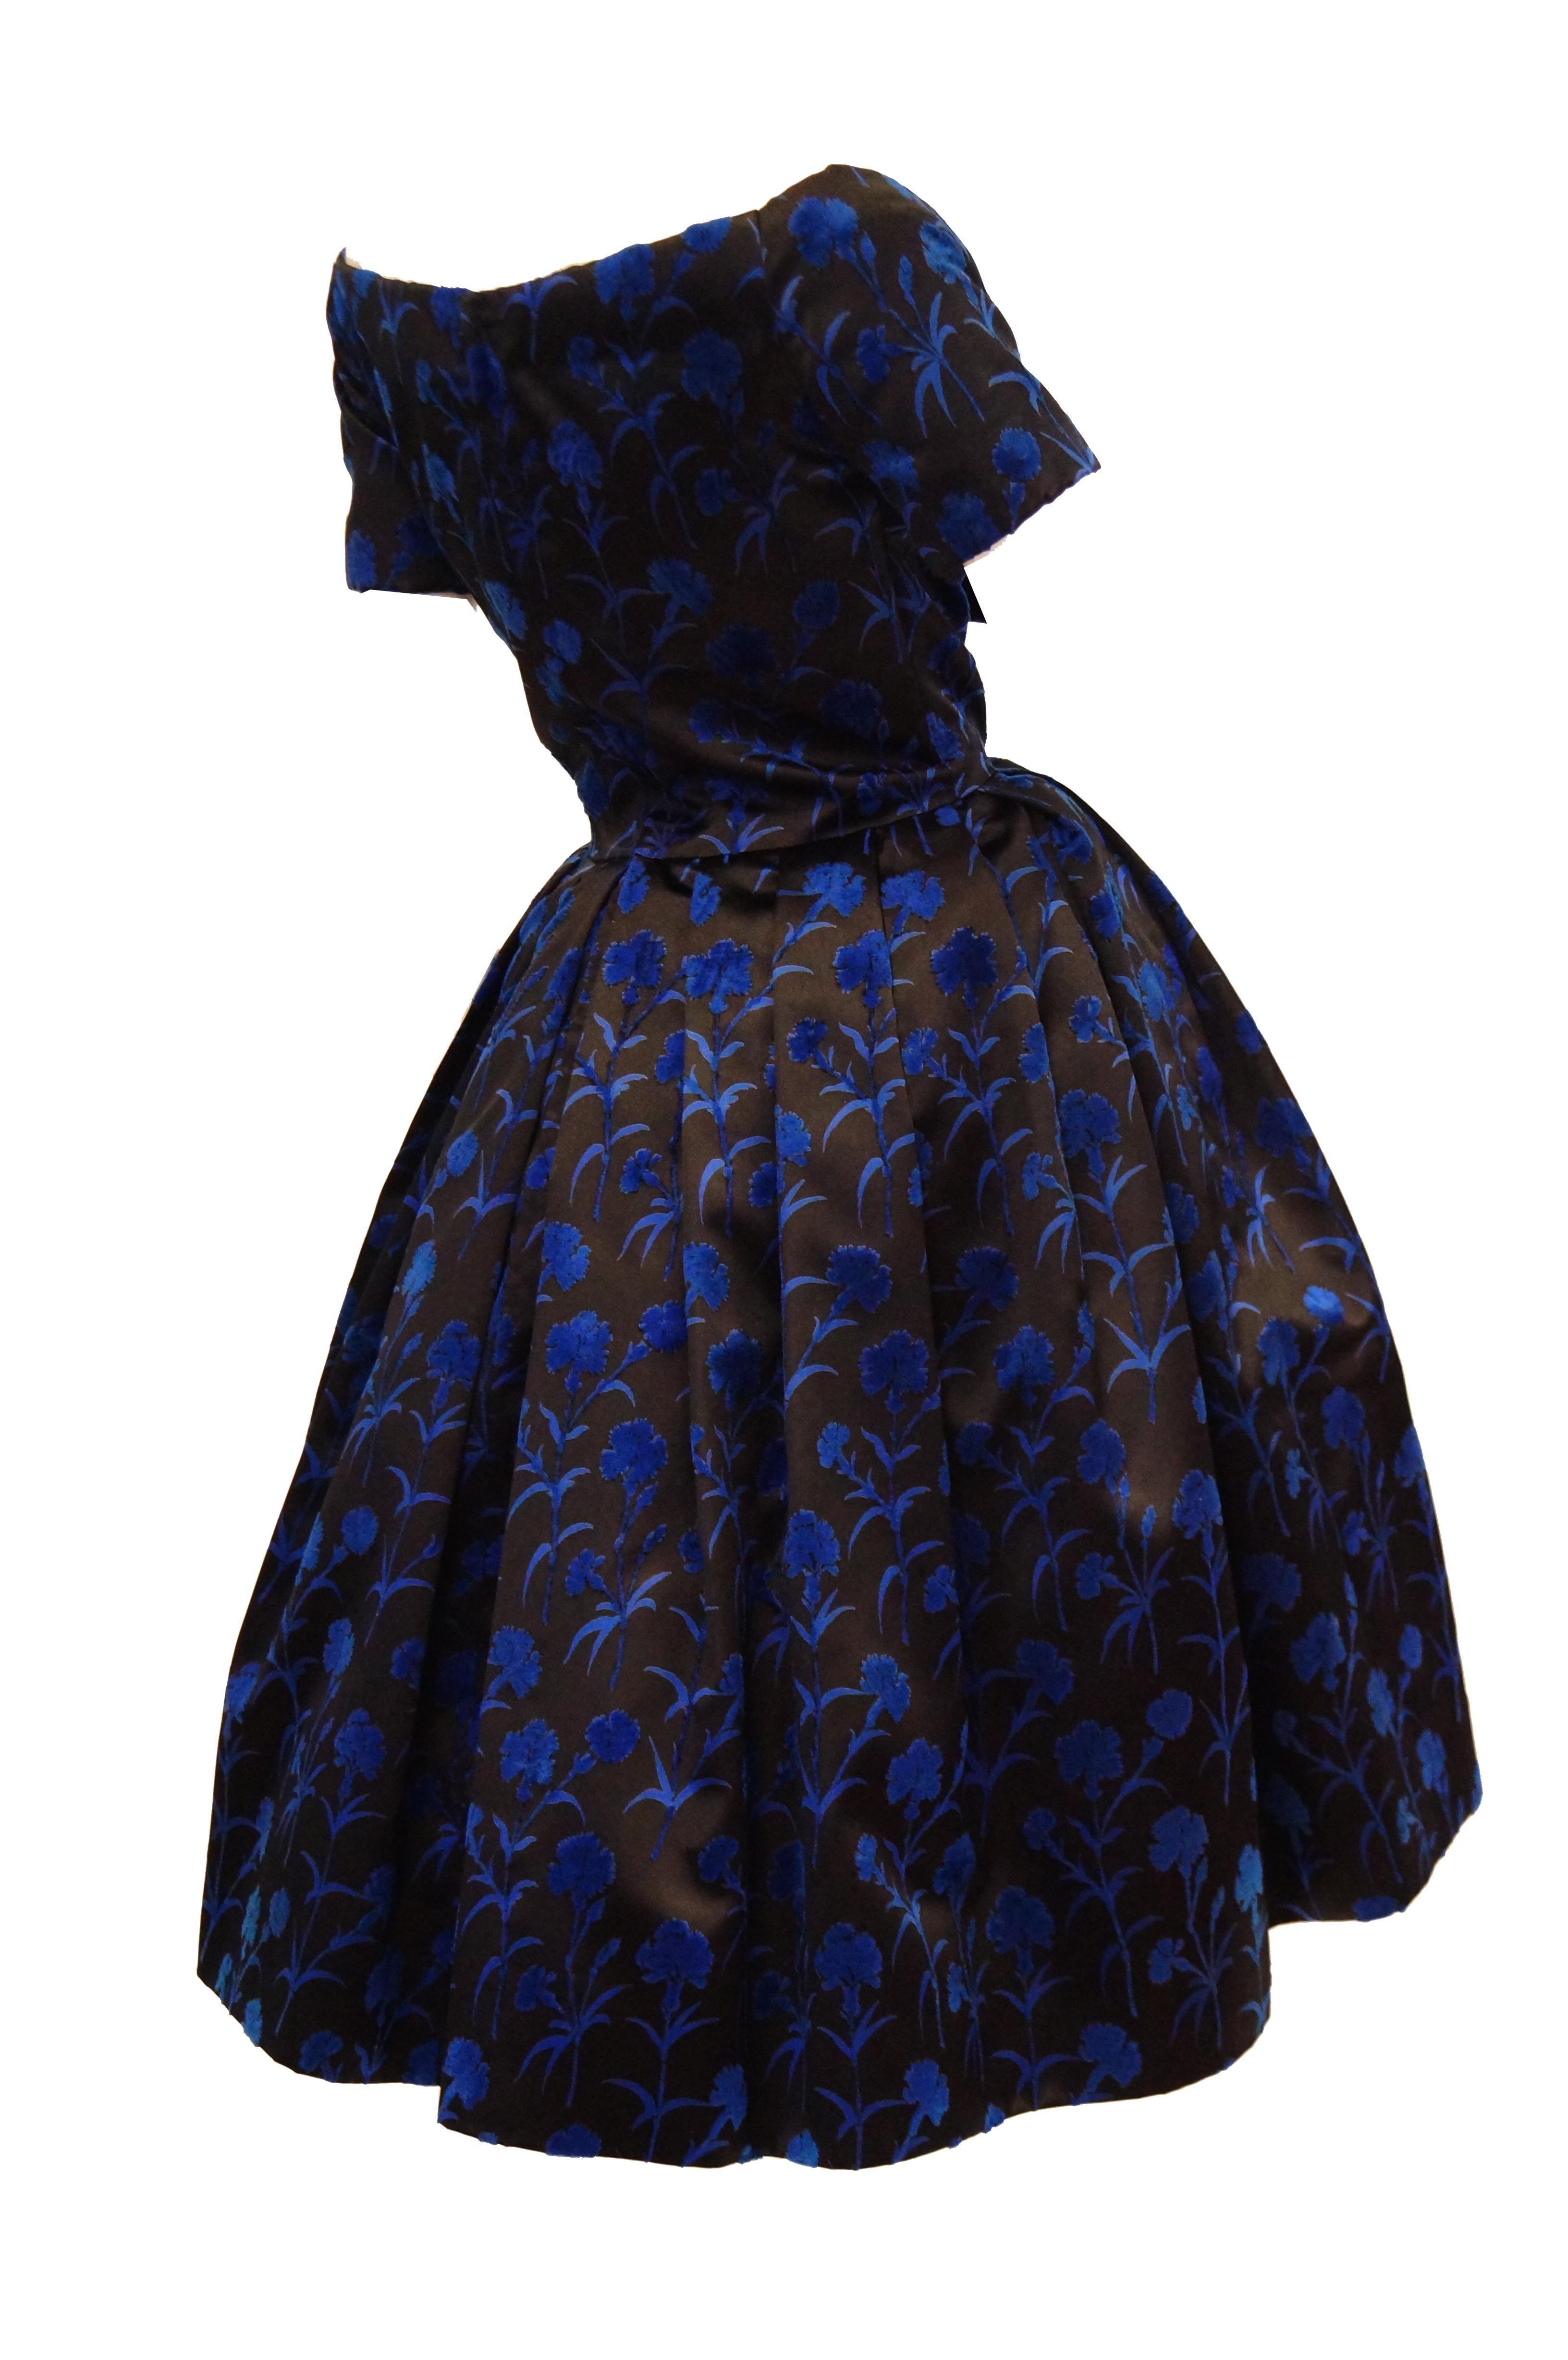 Important 1950s Christian Dior Couture Blue & Black Silk & Velvet New Look Dress In Excellent Condition For Sale In Houston, TX